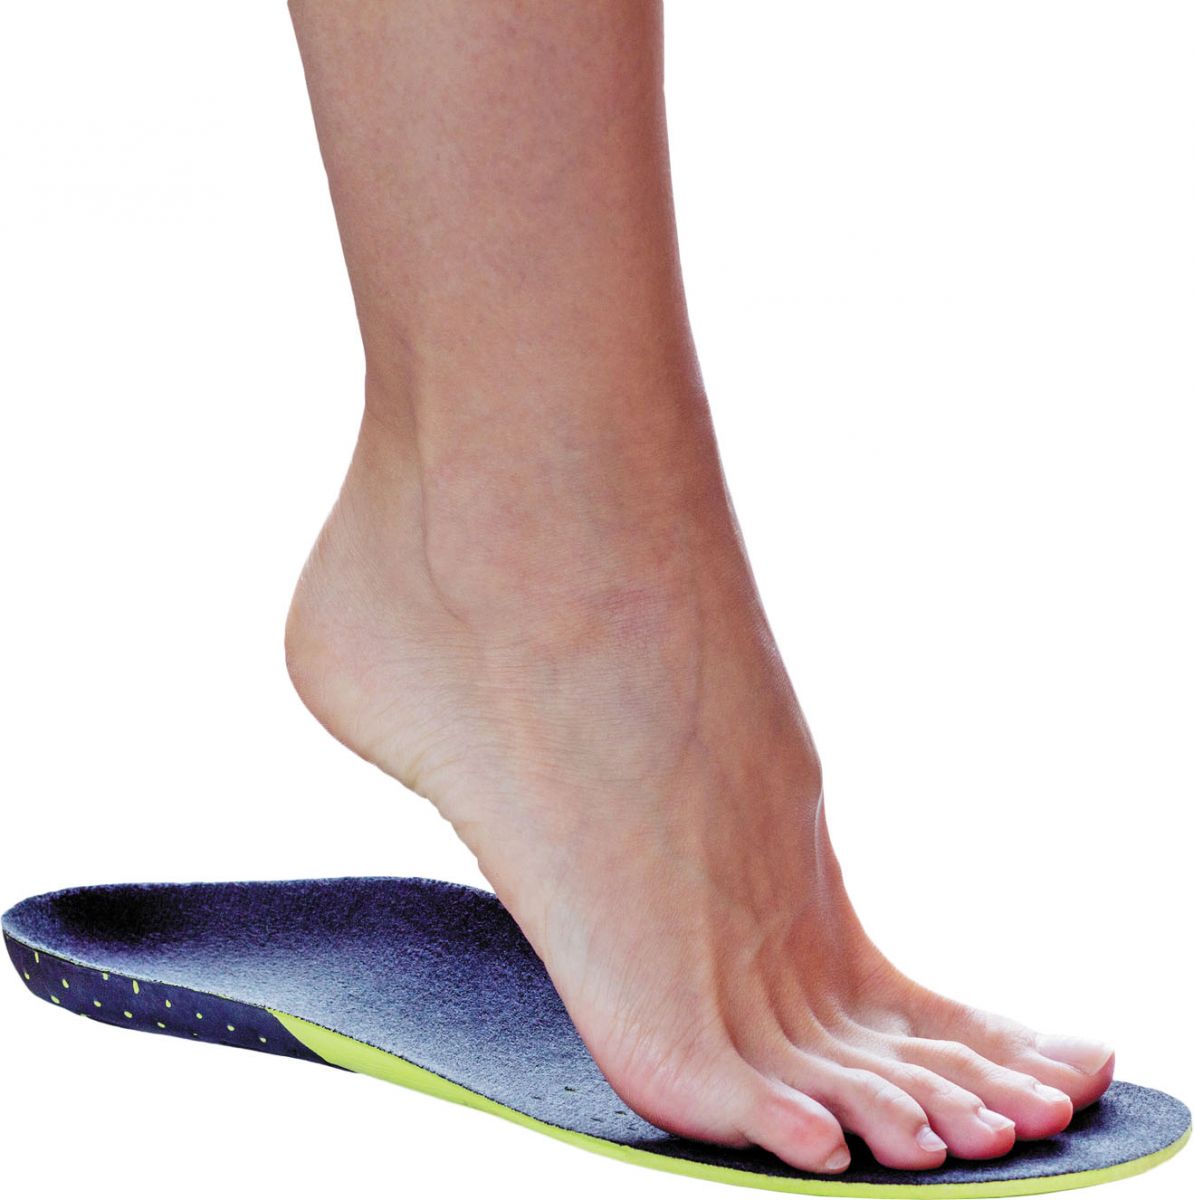 store-bought versions for heel pain 